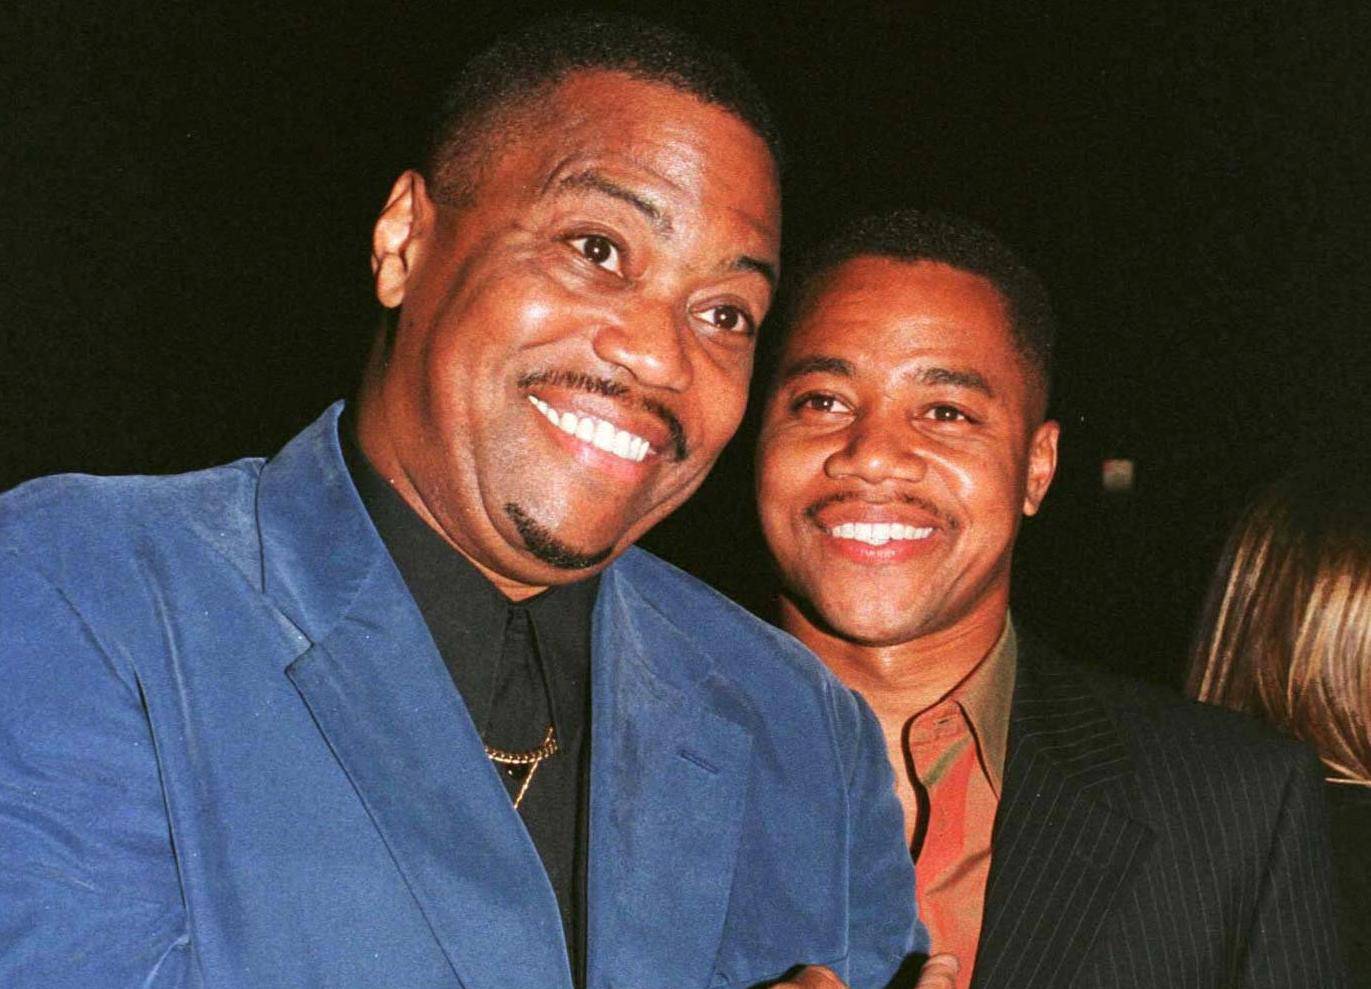 FILE PHOTO: Actor Cuba Gooding, Jr. poses with his father Cuba Gooding, Sr. as they arrive for the film's premiere in Beverly Hills